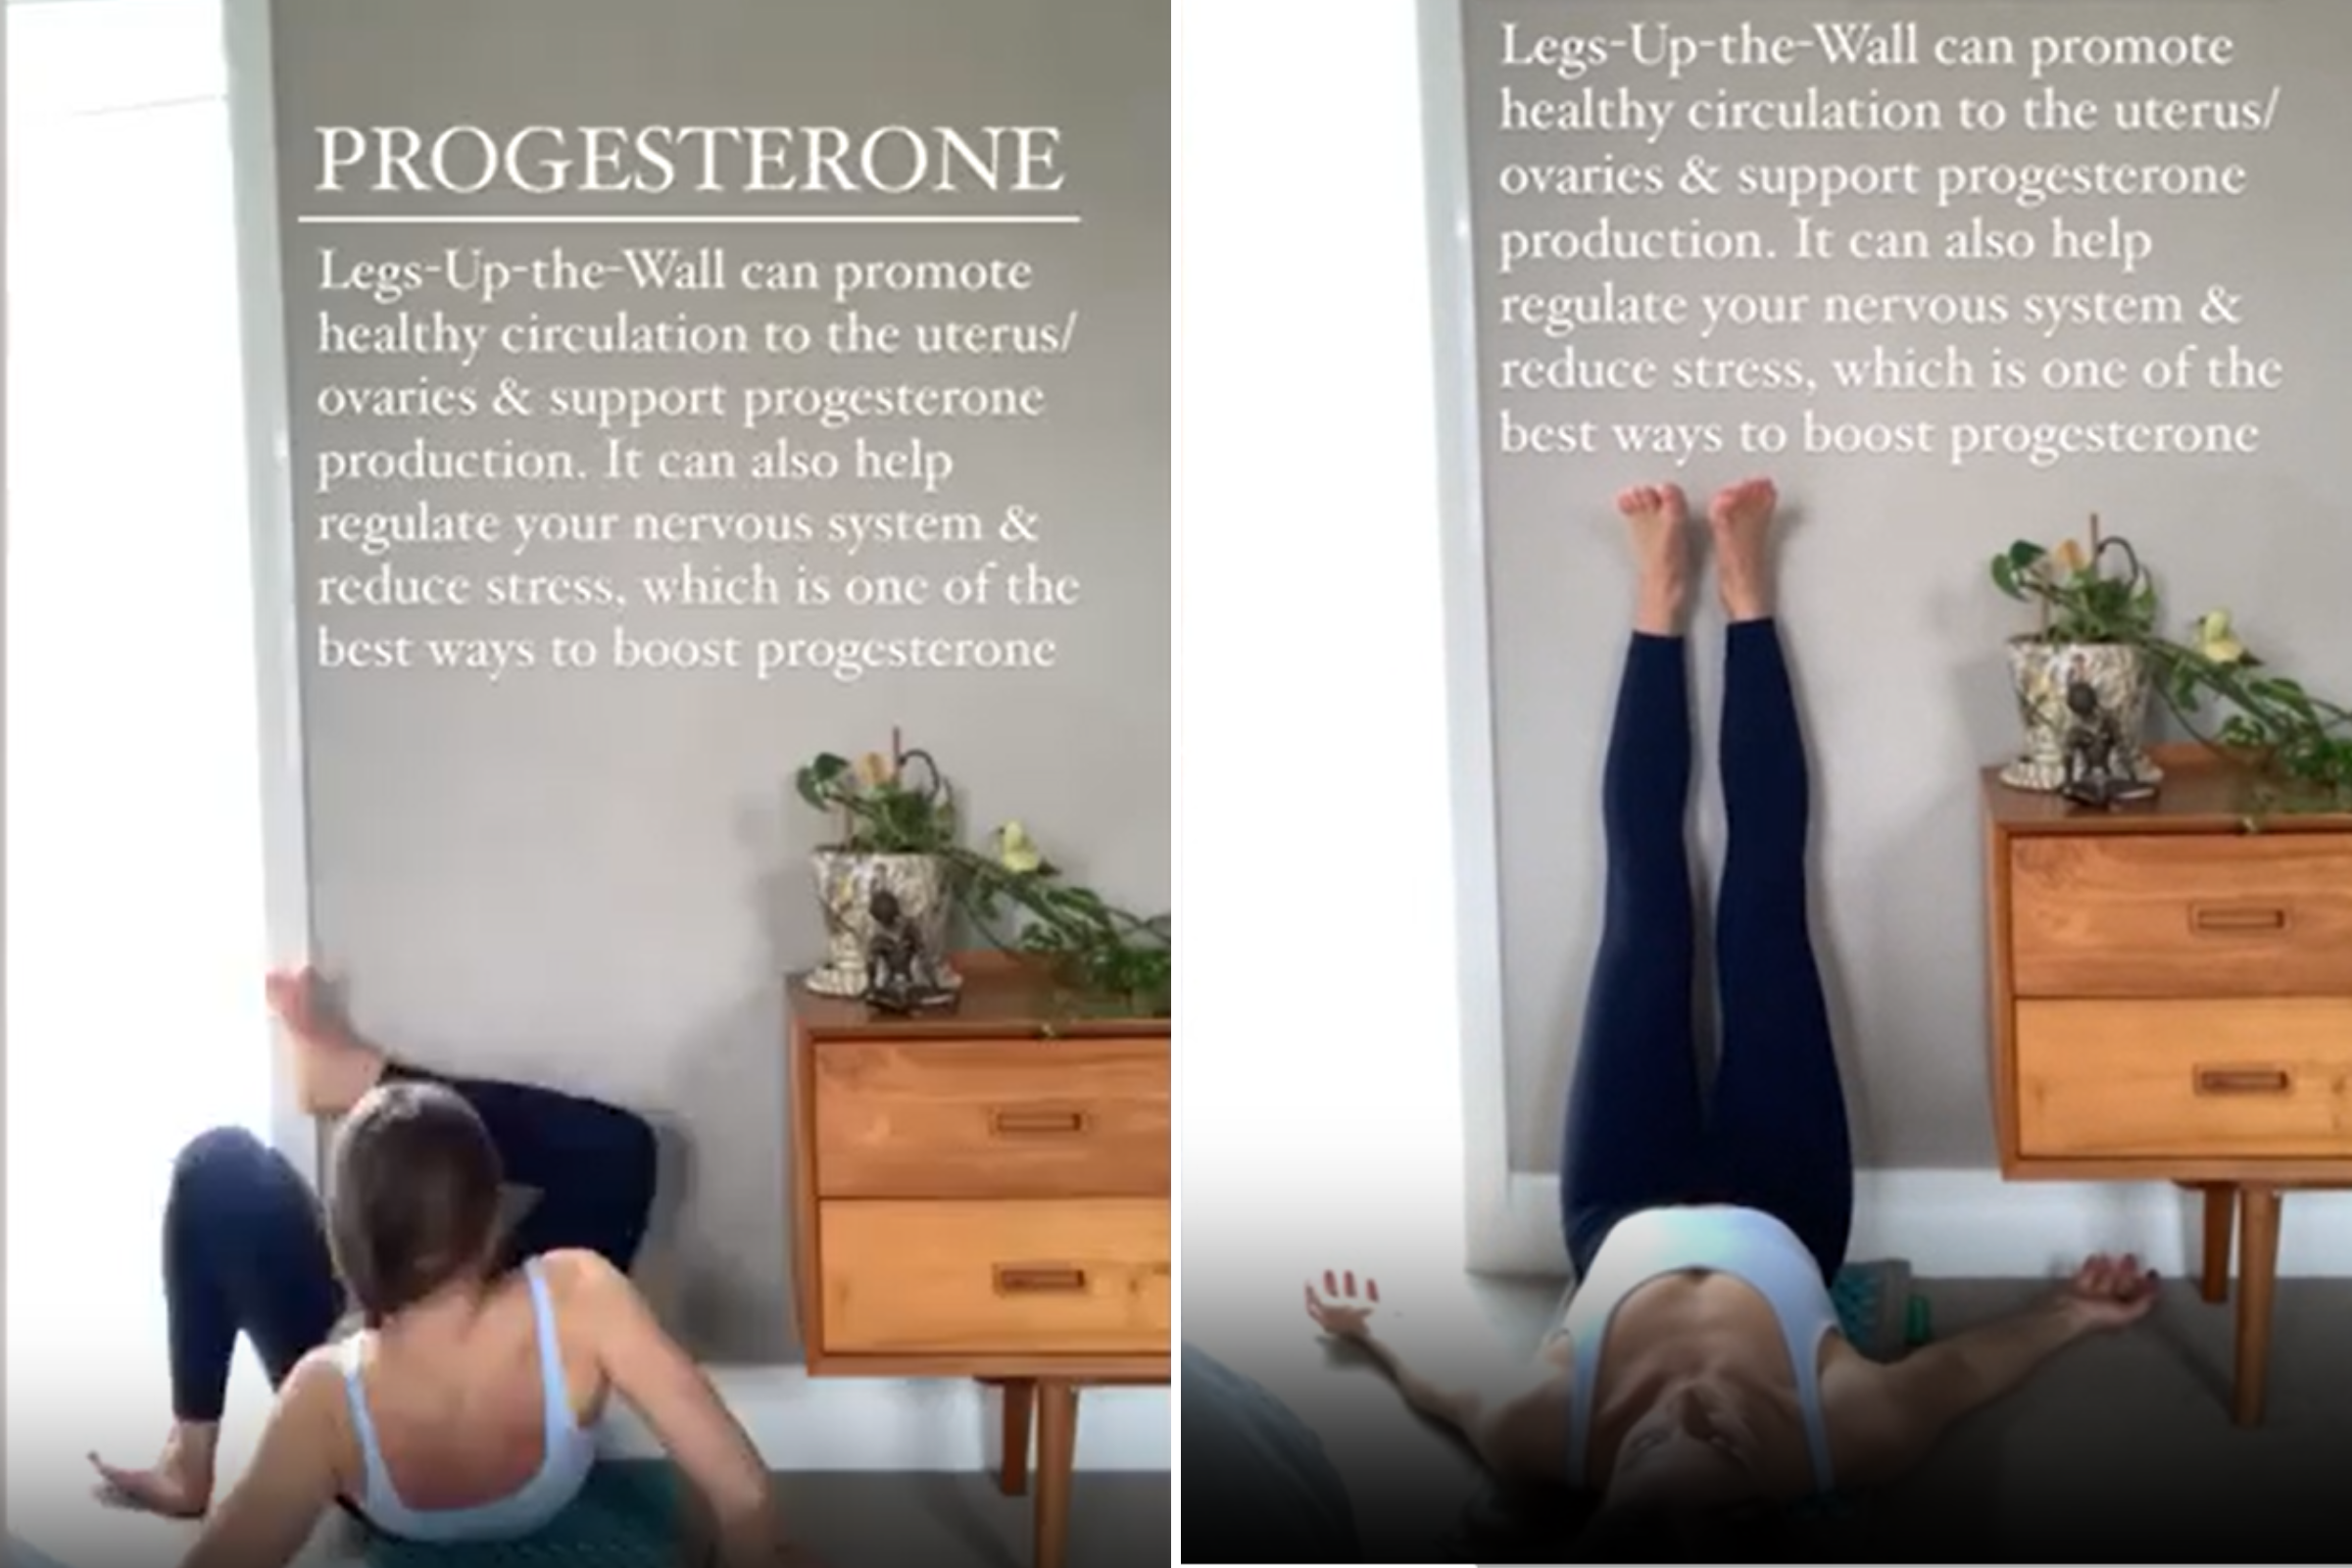 The Legs Up The Wall Yoga Pose Has Some Surprising Benefits